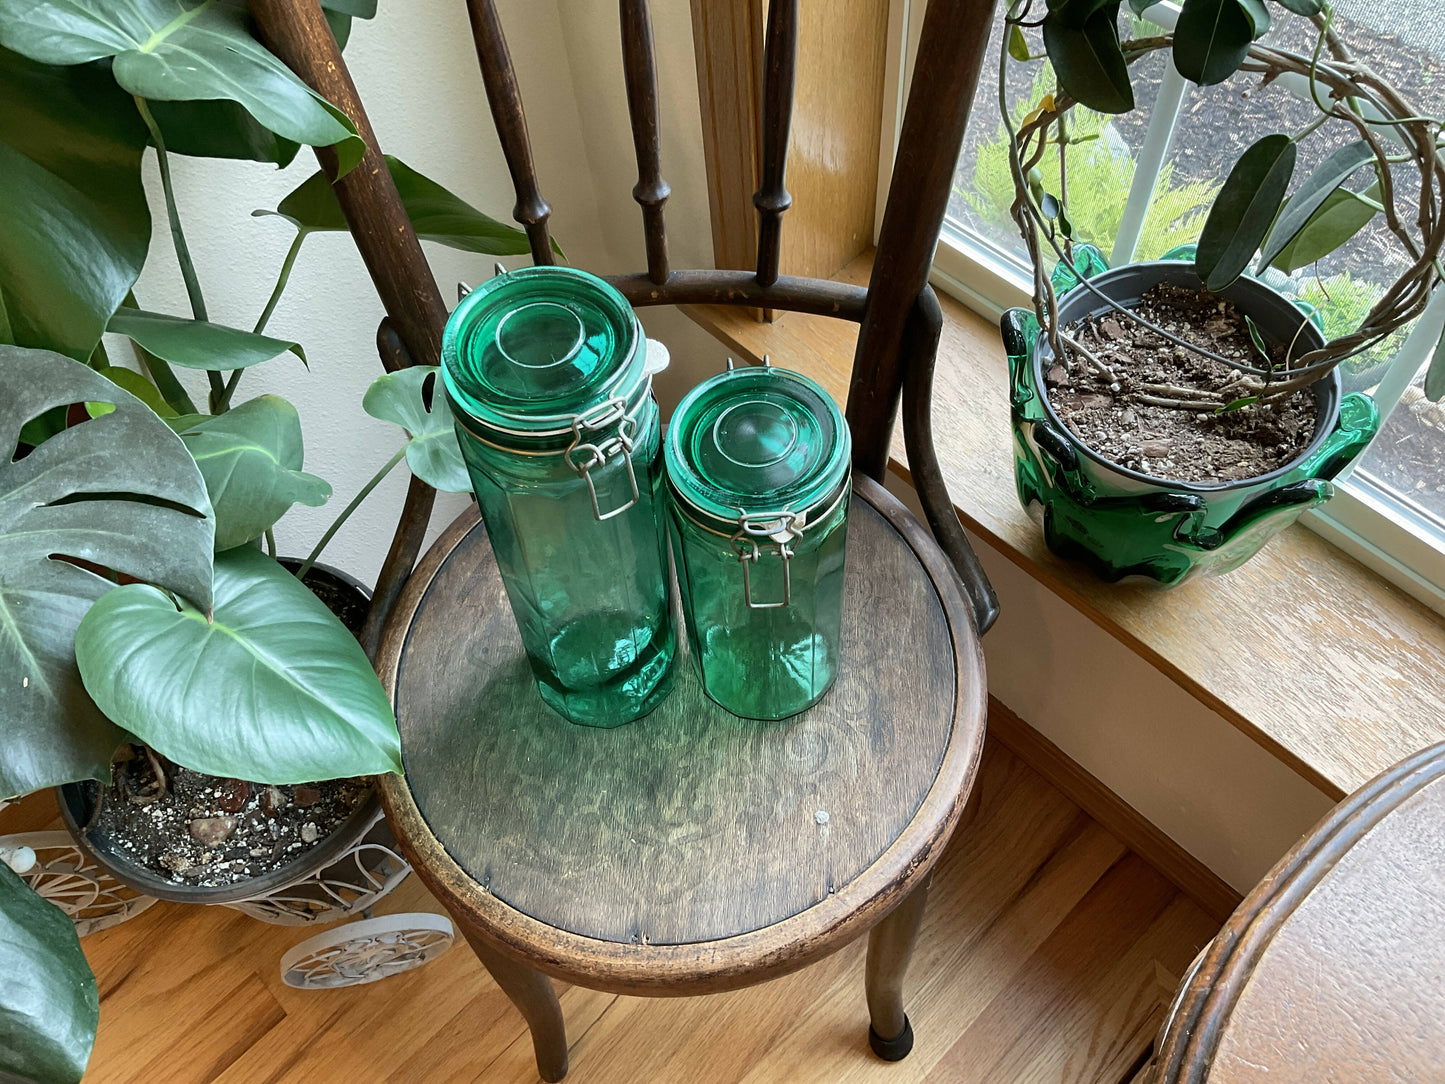 Vntg Large Green Glass Canister